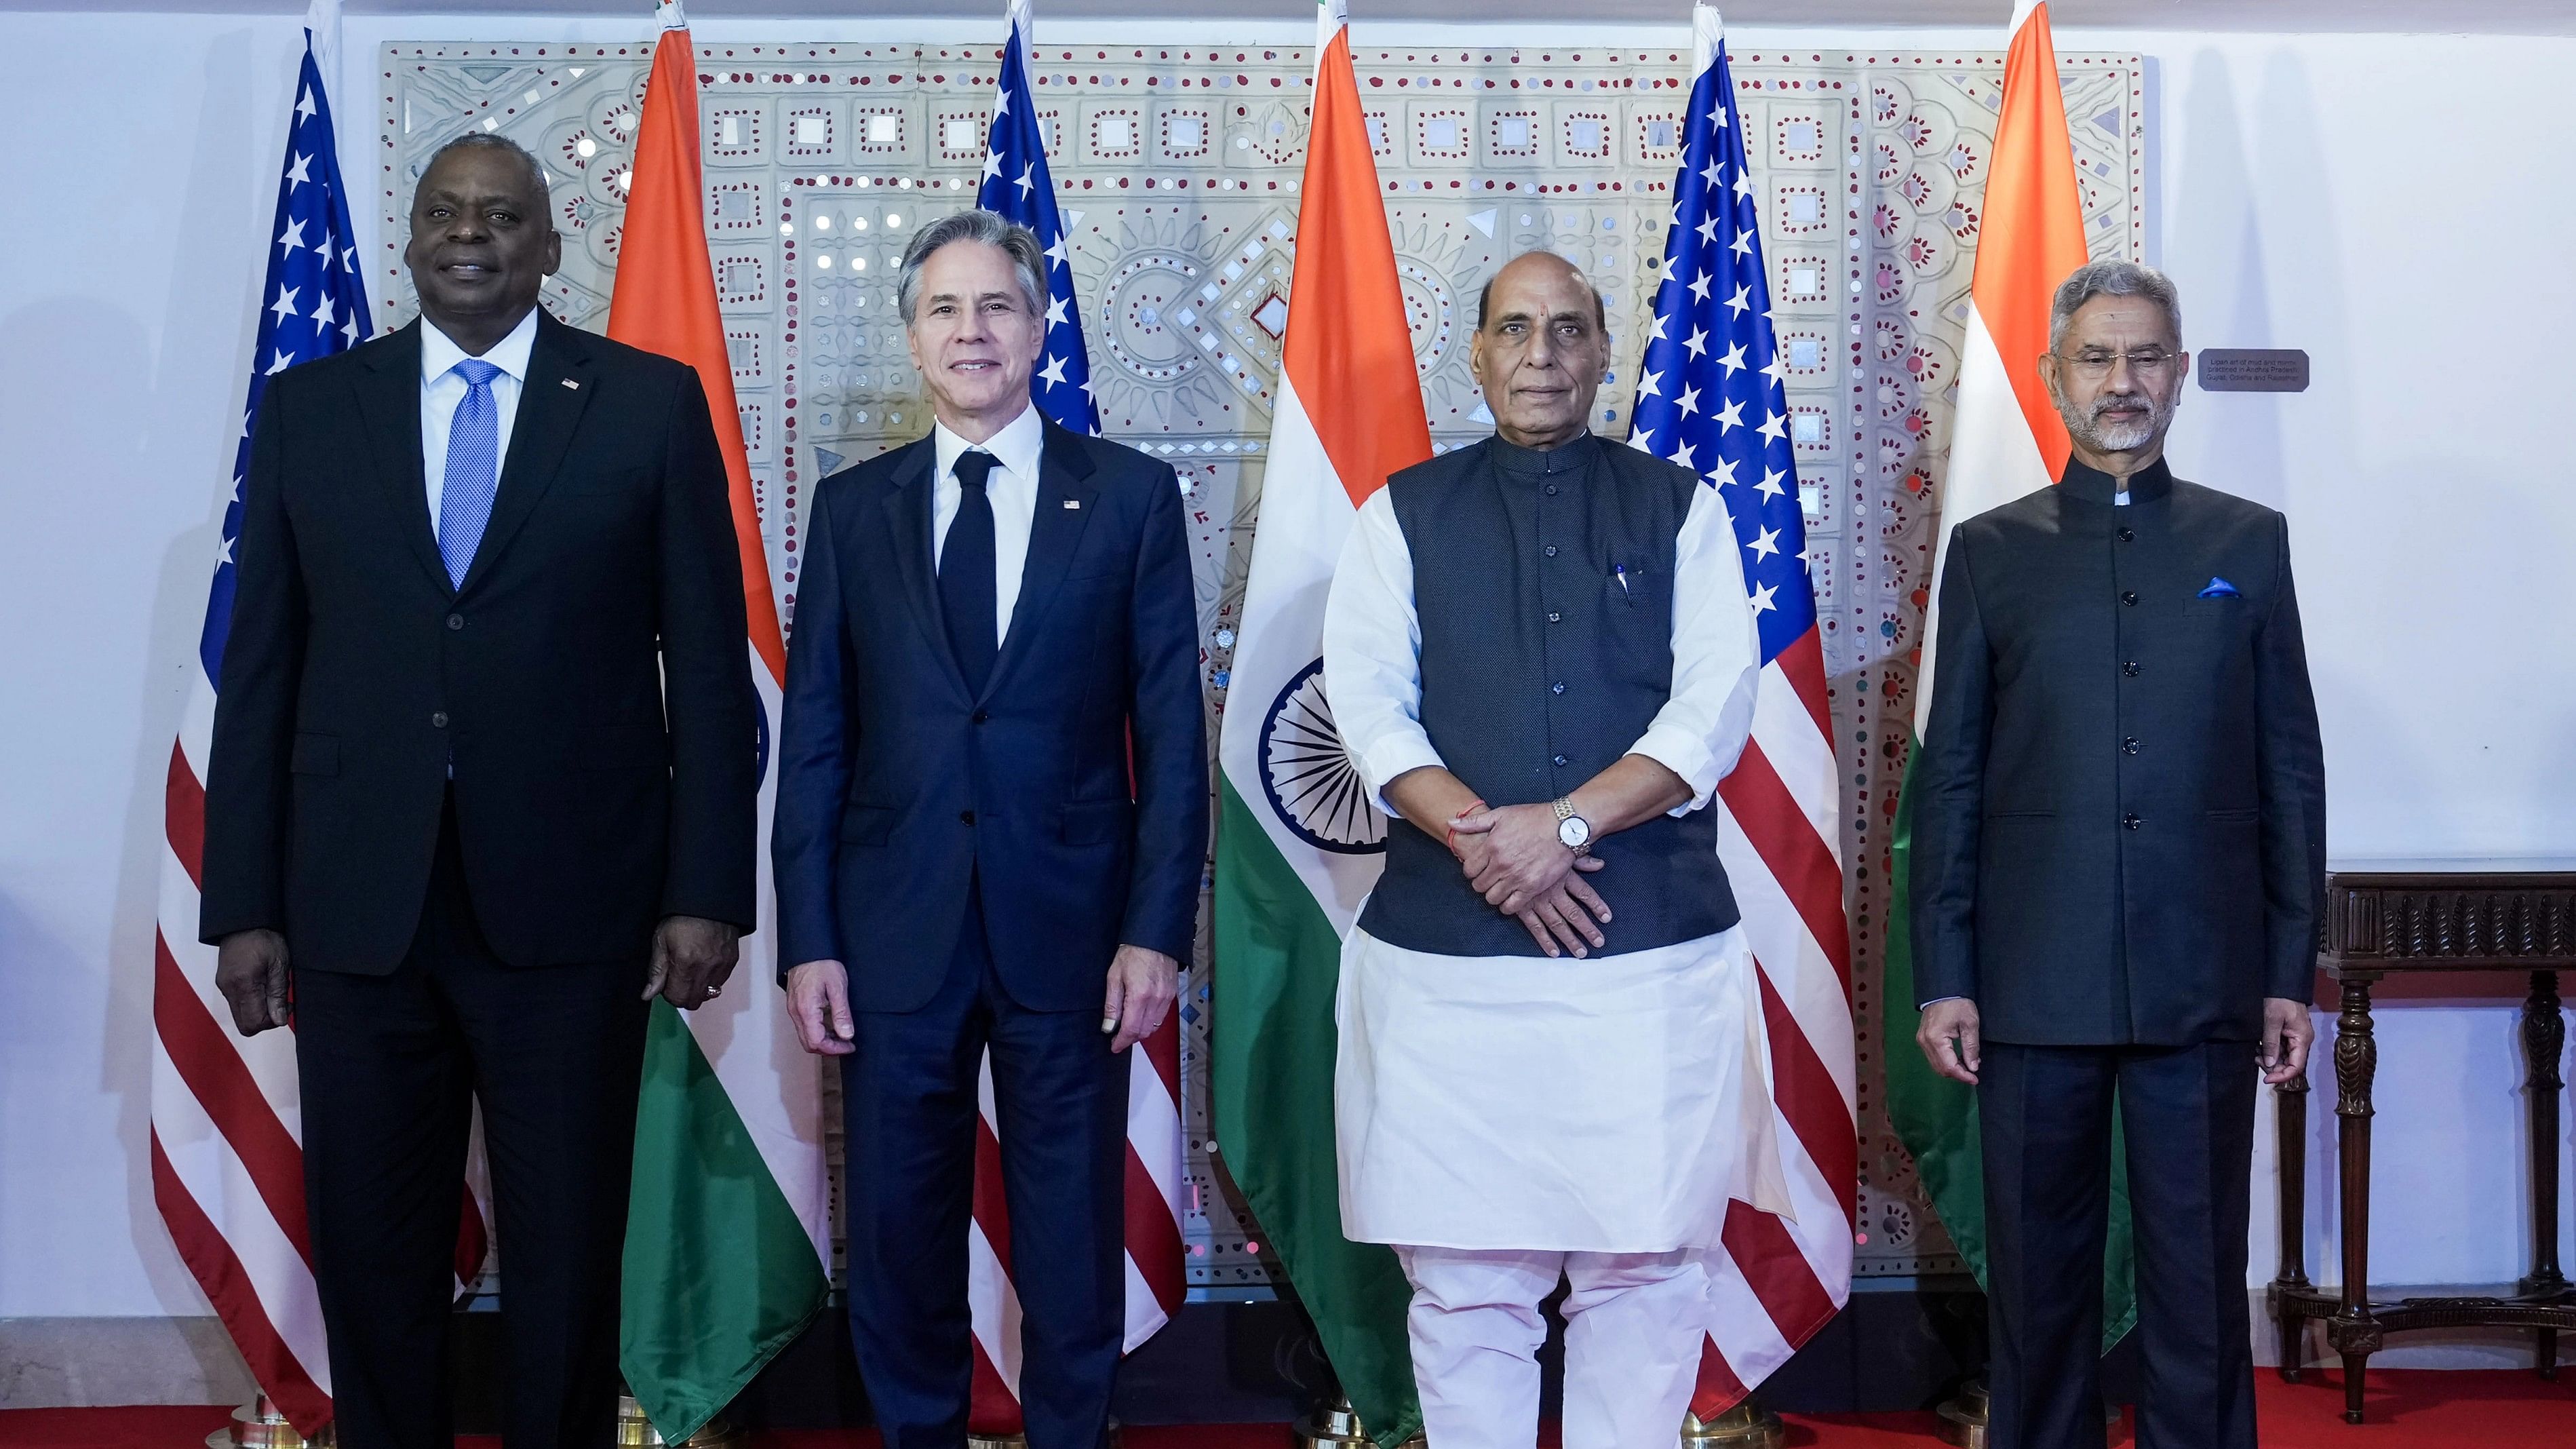 <div class="paragraphs"><p> Defence Minister Rajnath Singh and External Affairs Minister S Jaishankar with US Secretary of State Antony Blinken and US Secretary of Defence Lloyd Austin.</p></div>